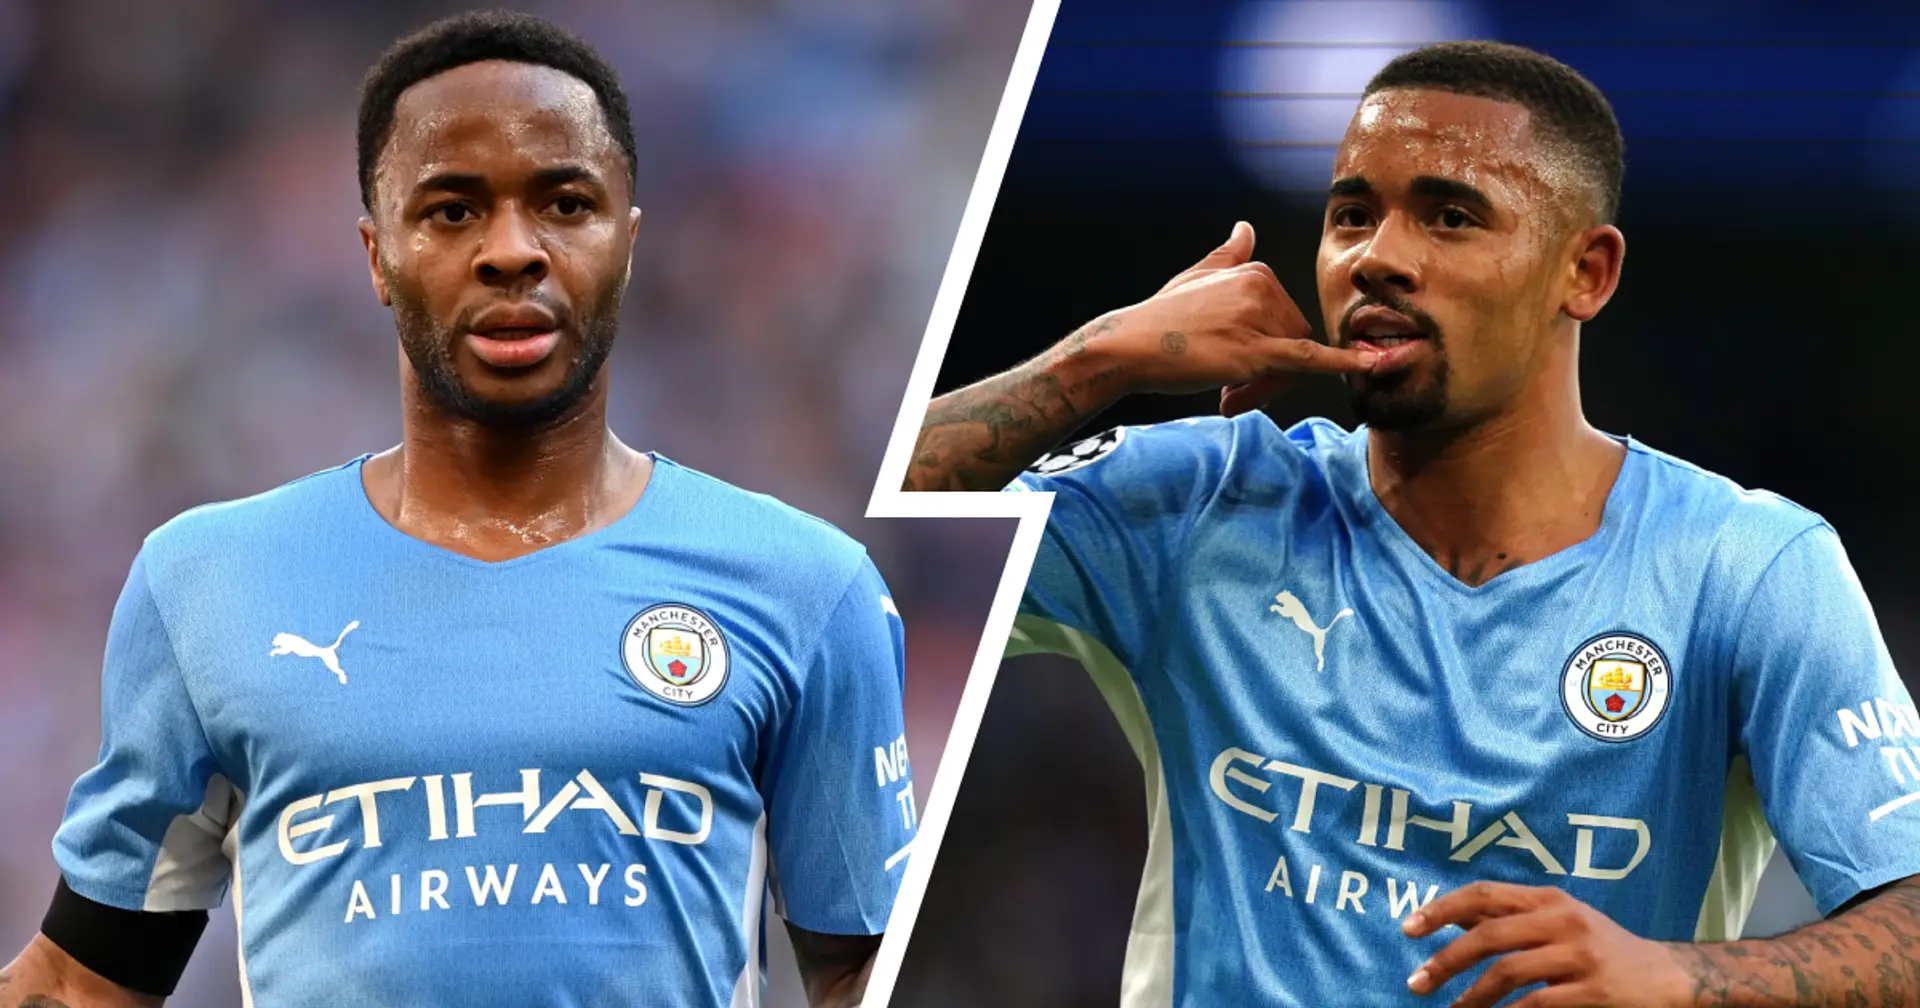 'Jesus is the perfect striker' vs 'Sterling's record is great': Chelsea fans debate which Man City player they want